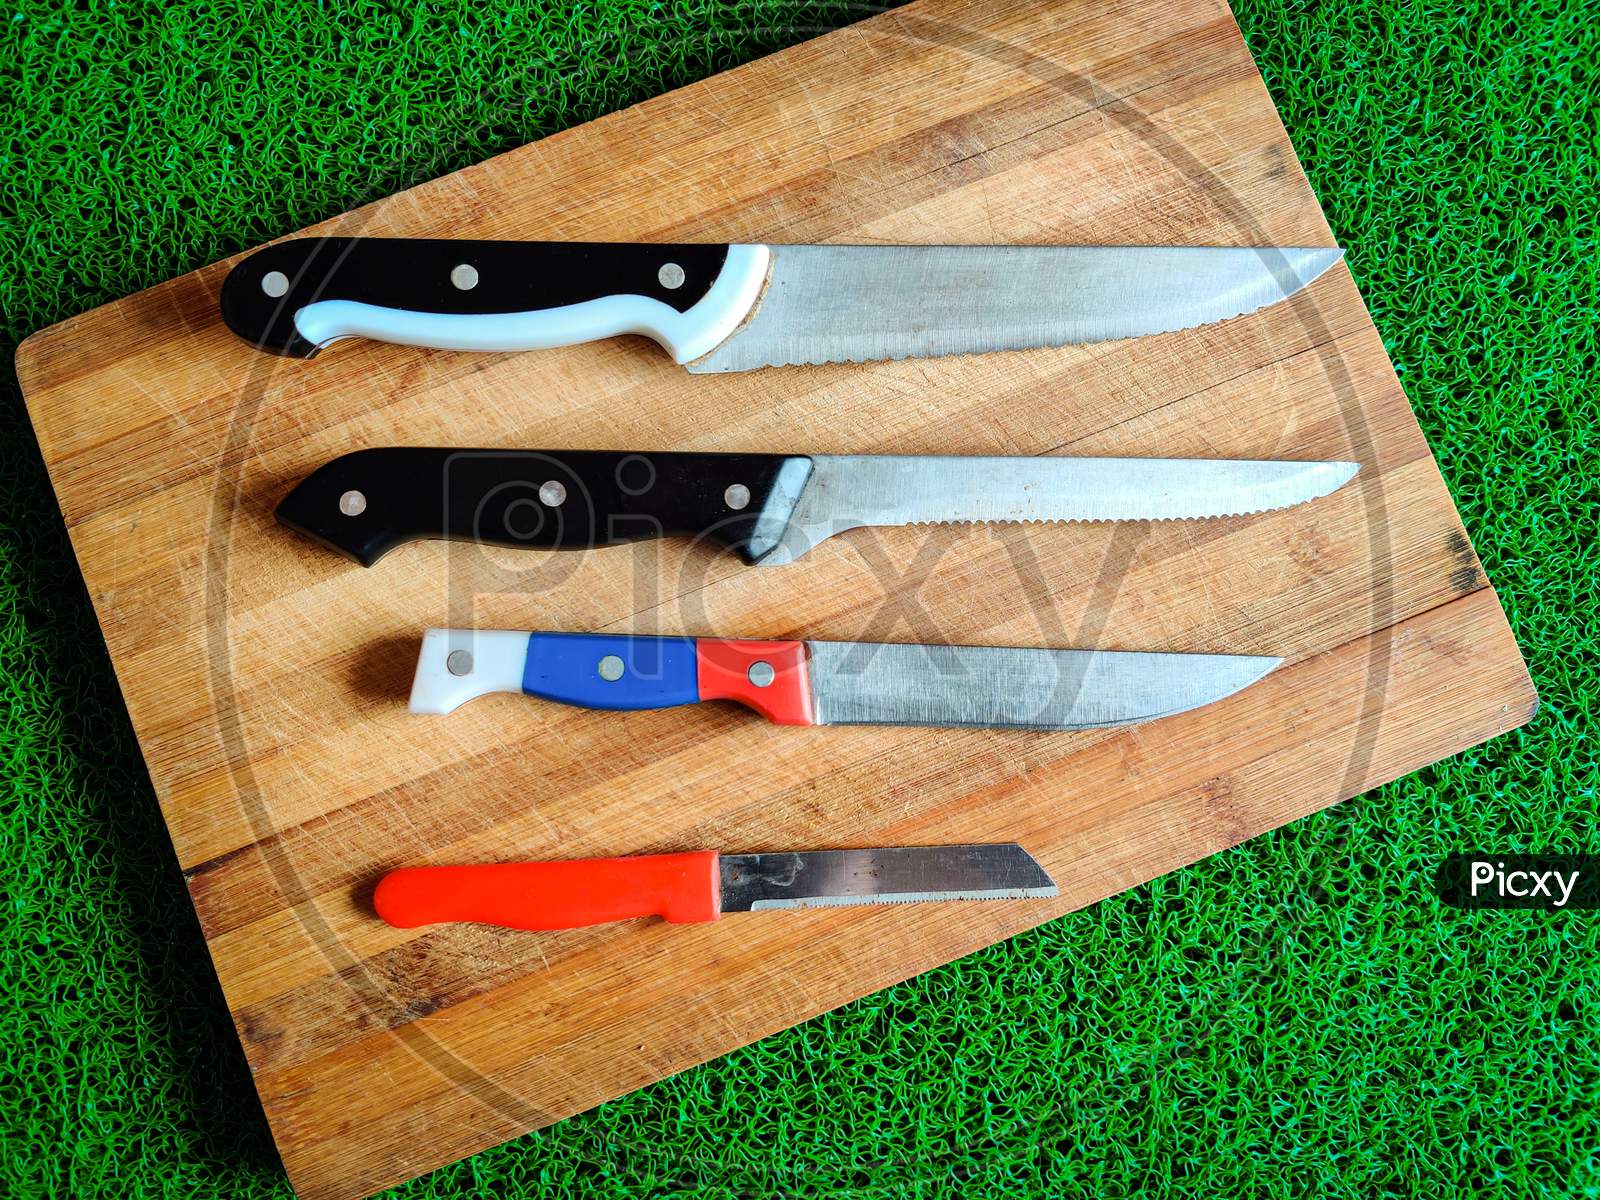 Four Colored Different Sizes Of Knives Kept On Chopping Board.